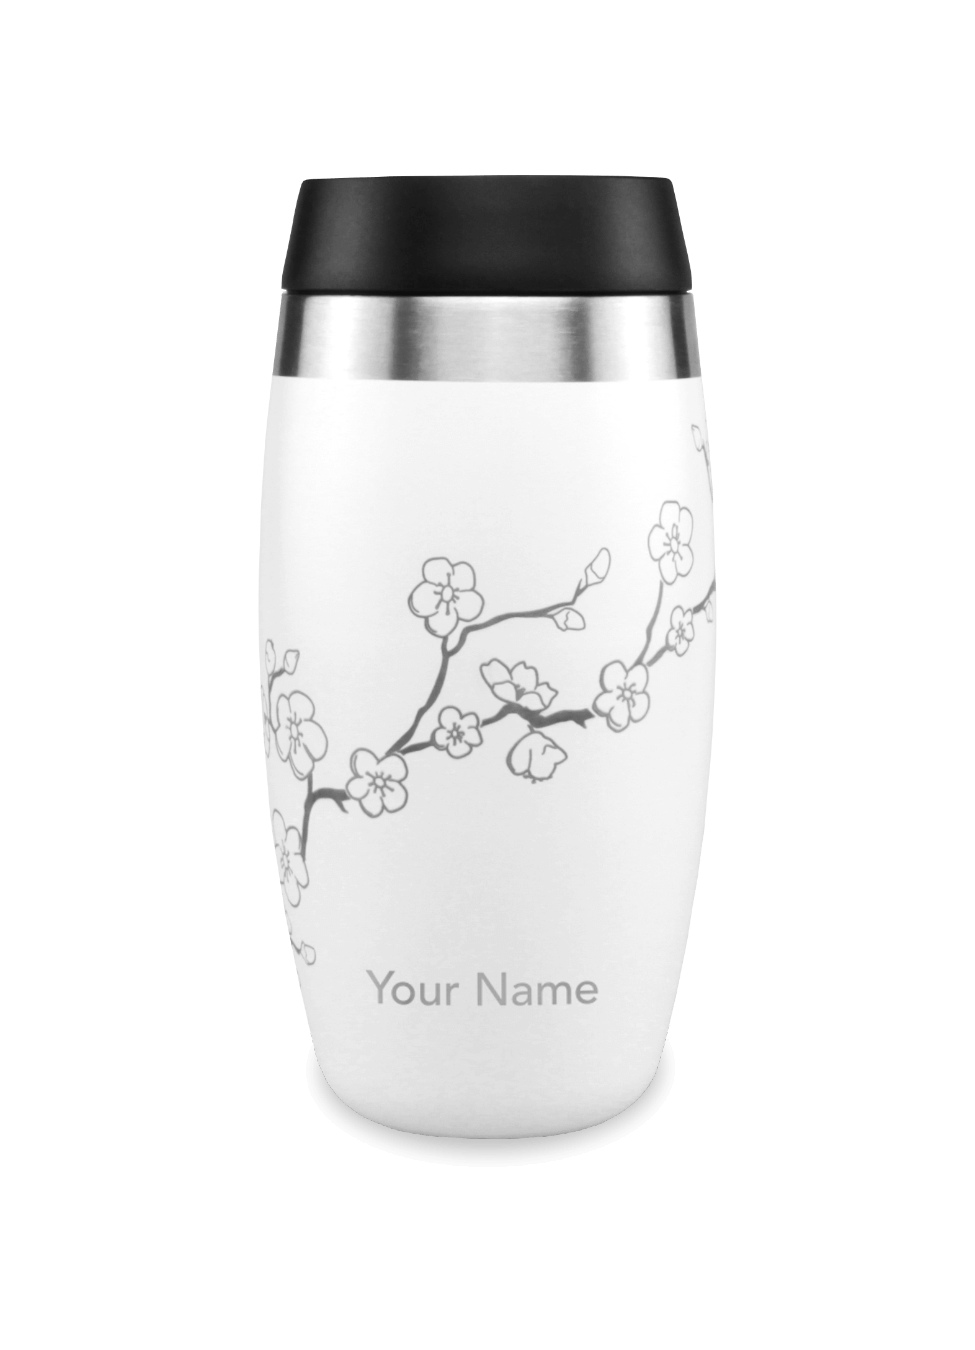 Personalised coffee flask in white with floral design